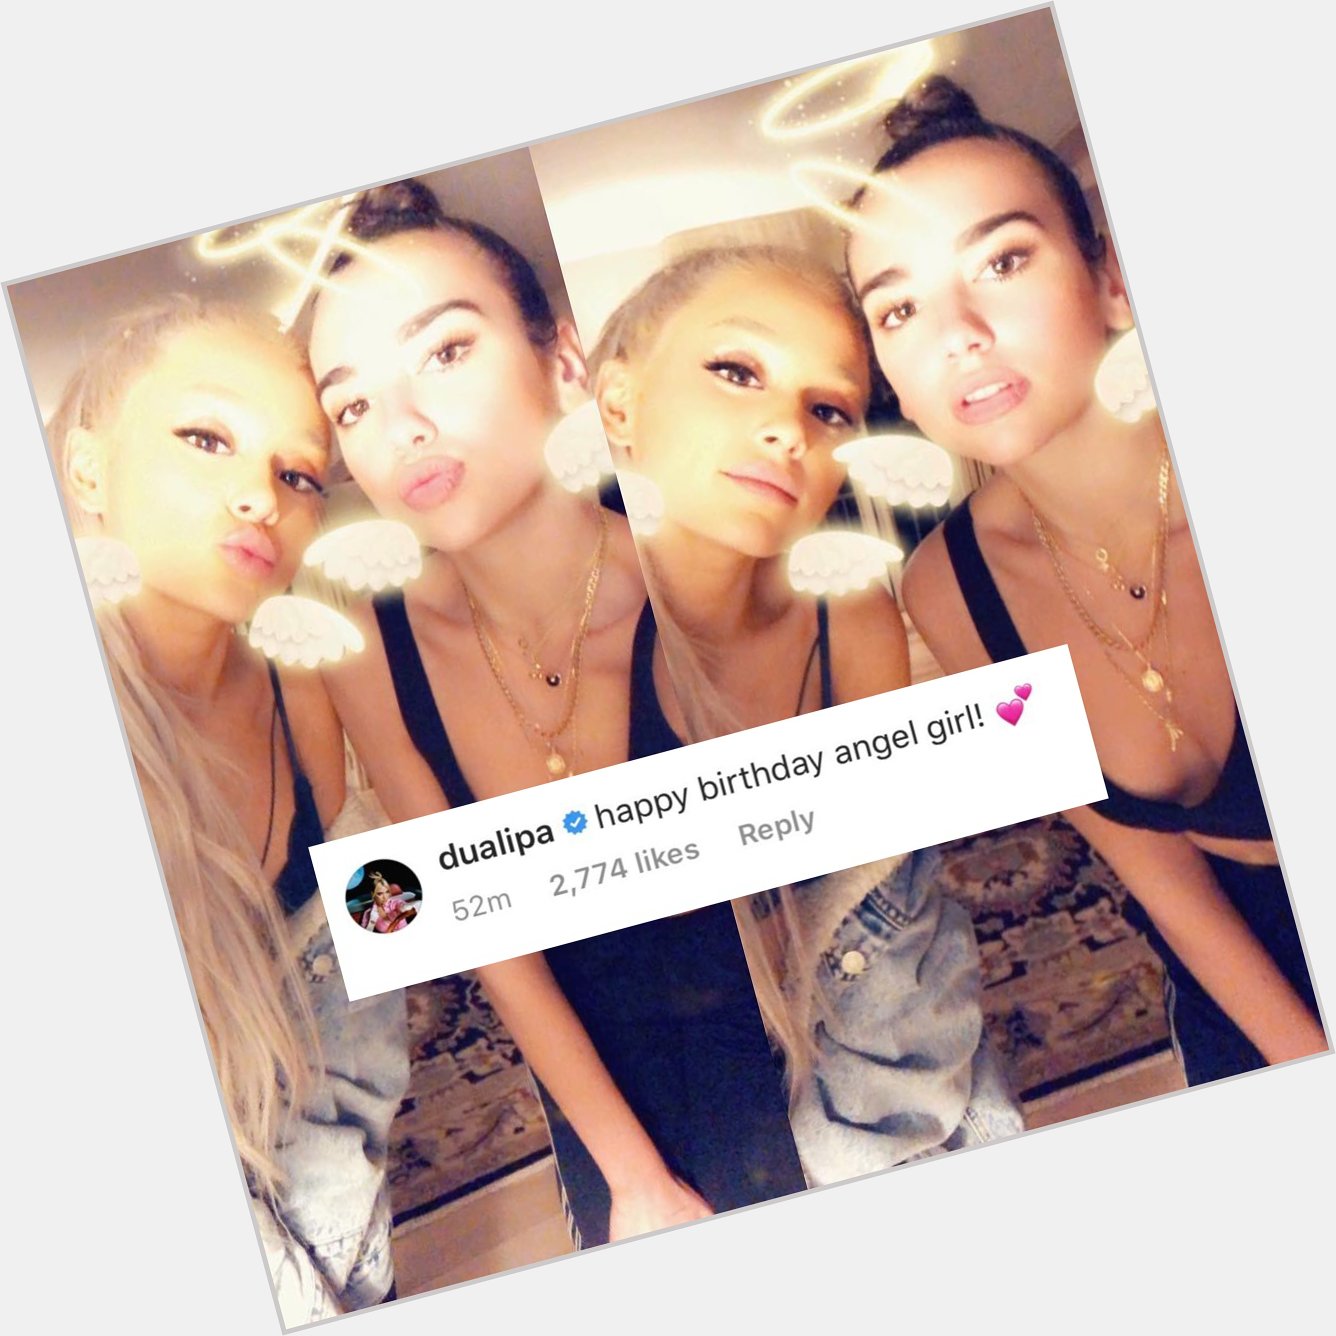 Dua Lipa leaves a comment for Ariana Grande wishing her a Happy Birthday! 